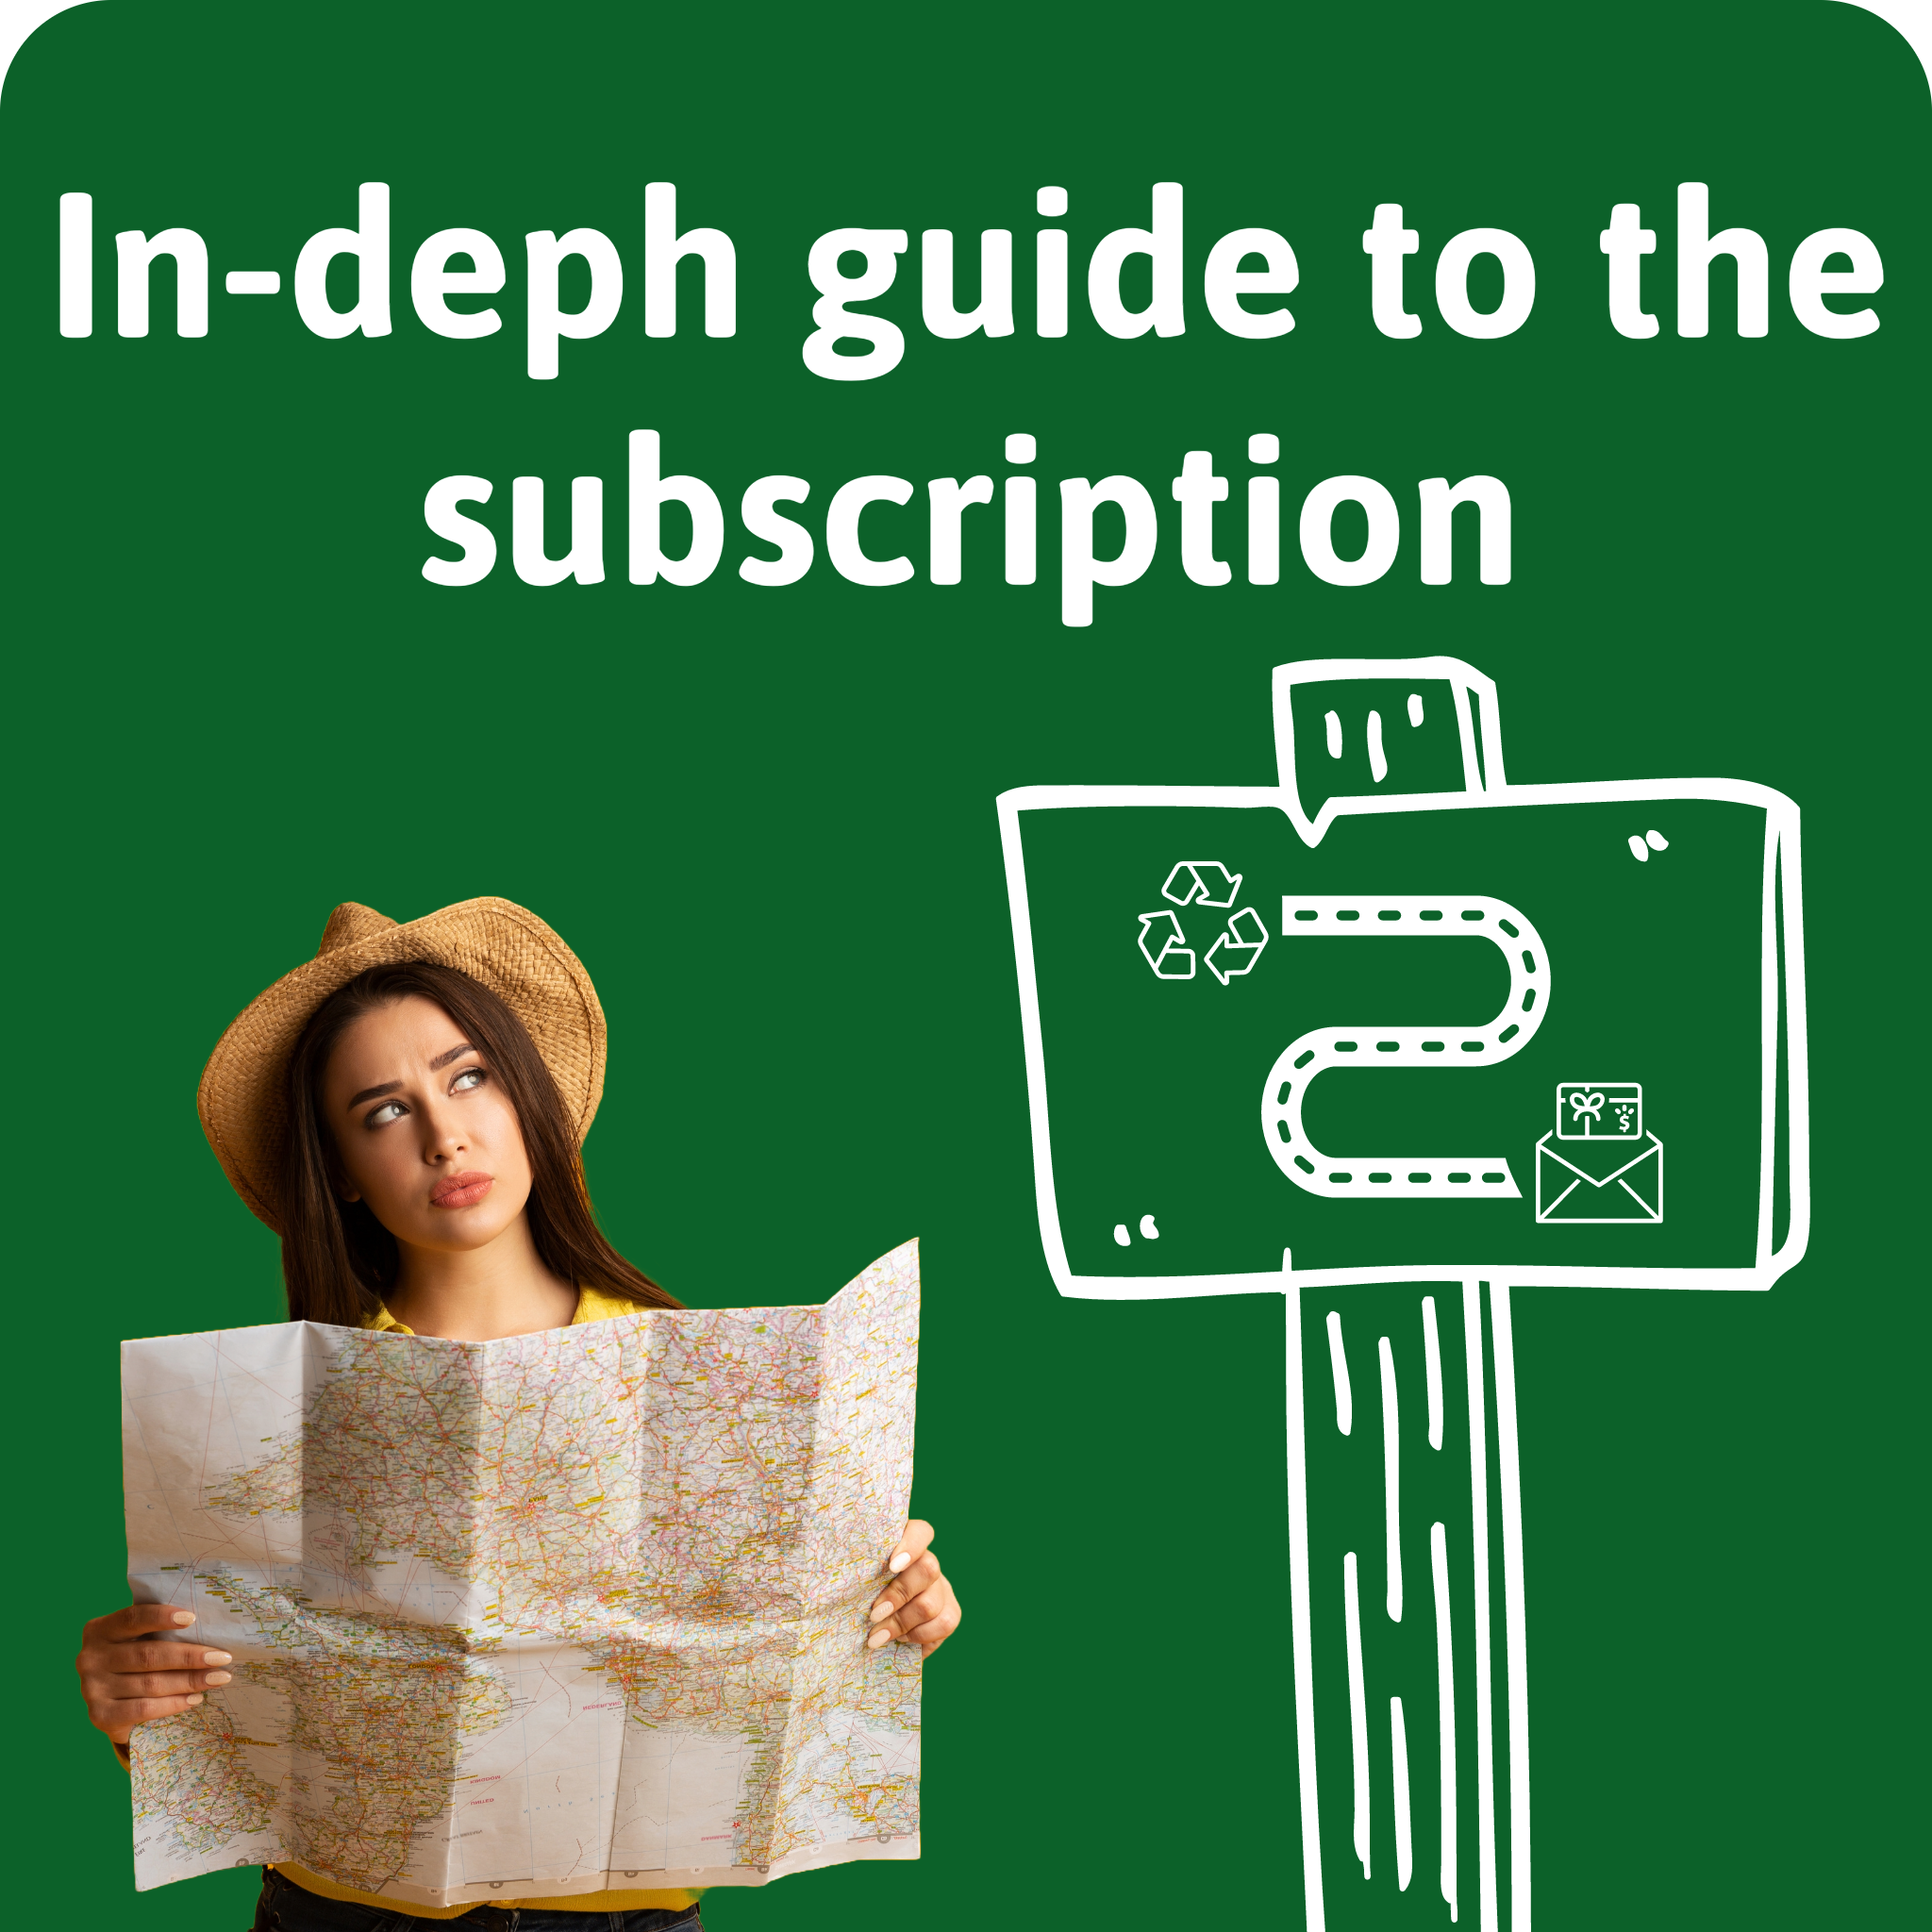 In-depth guide to the subscription is the text on this image. The text is in white, and the background is green. There is a woman holding a map looking at a sign showing the recycling logo with a path leading to the subscription logo.